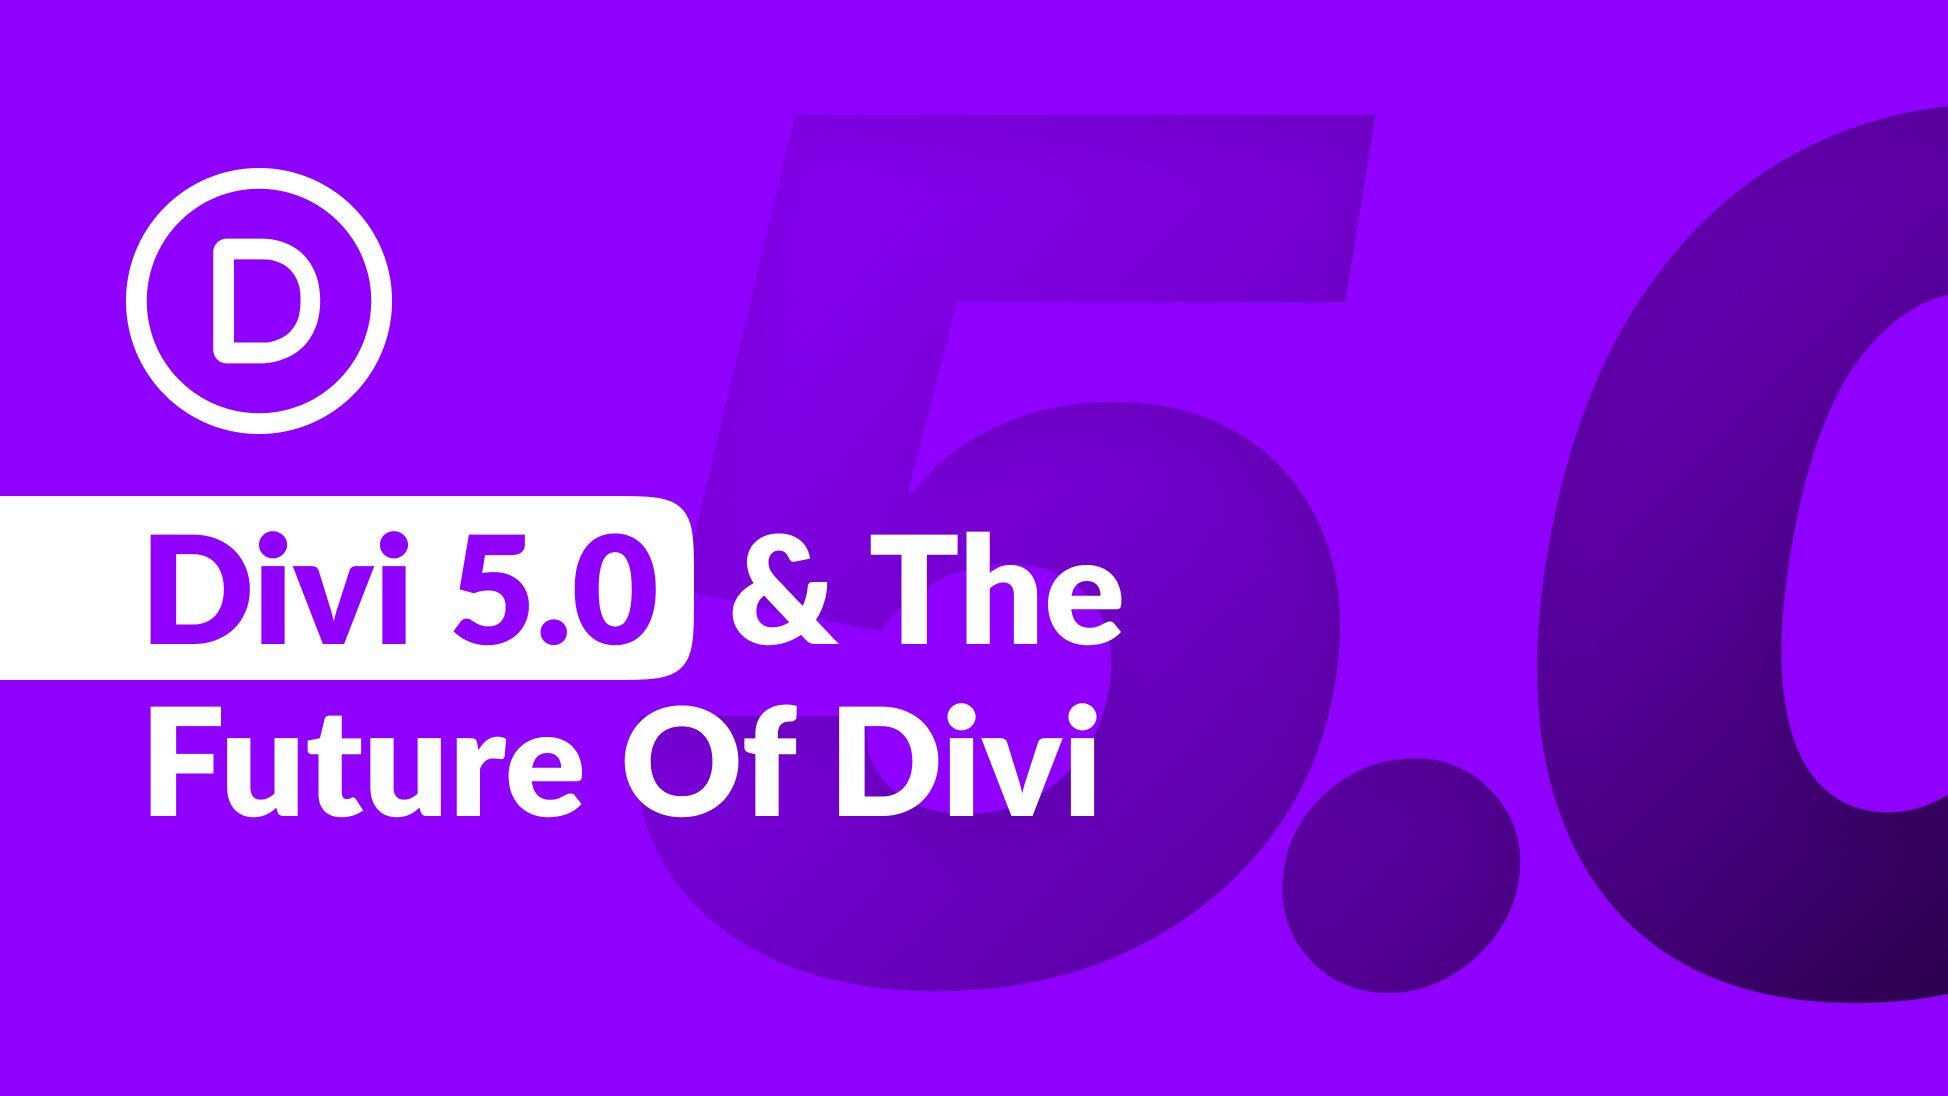 Let’s Talk About Divi 5.0 And The Future Of Divi